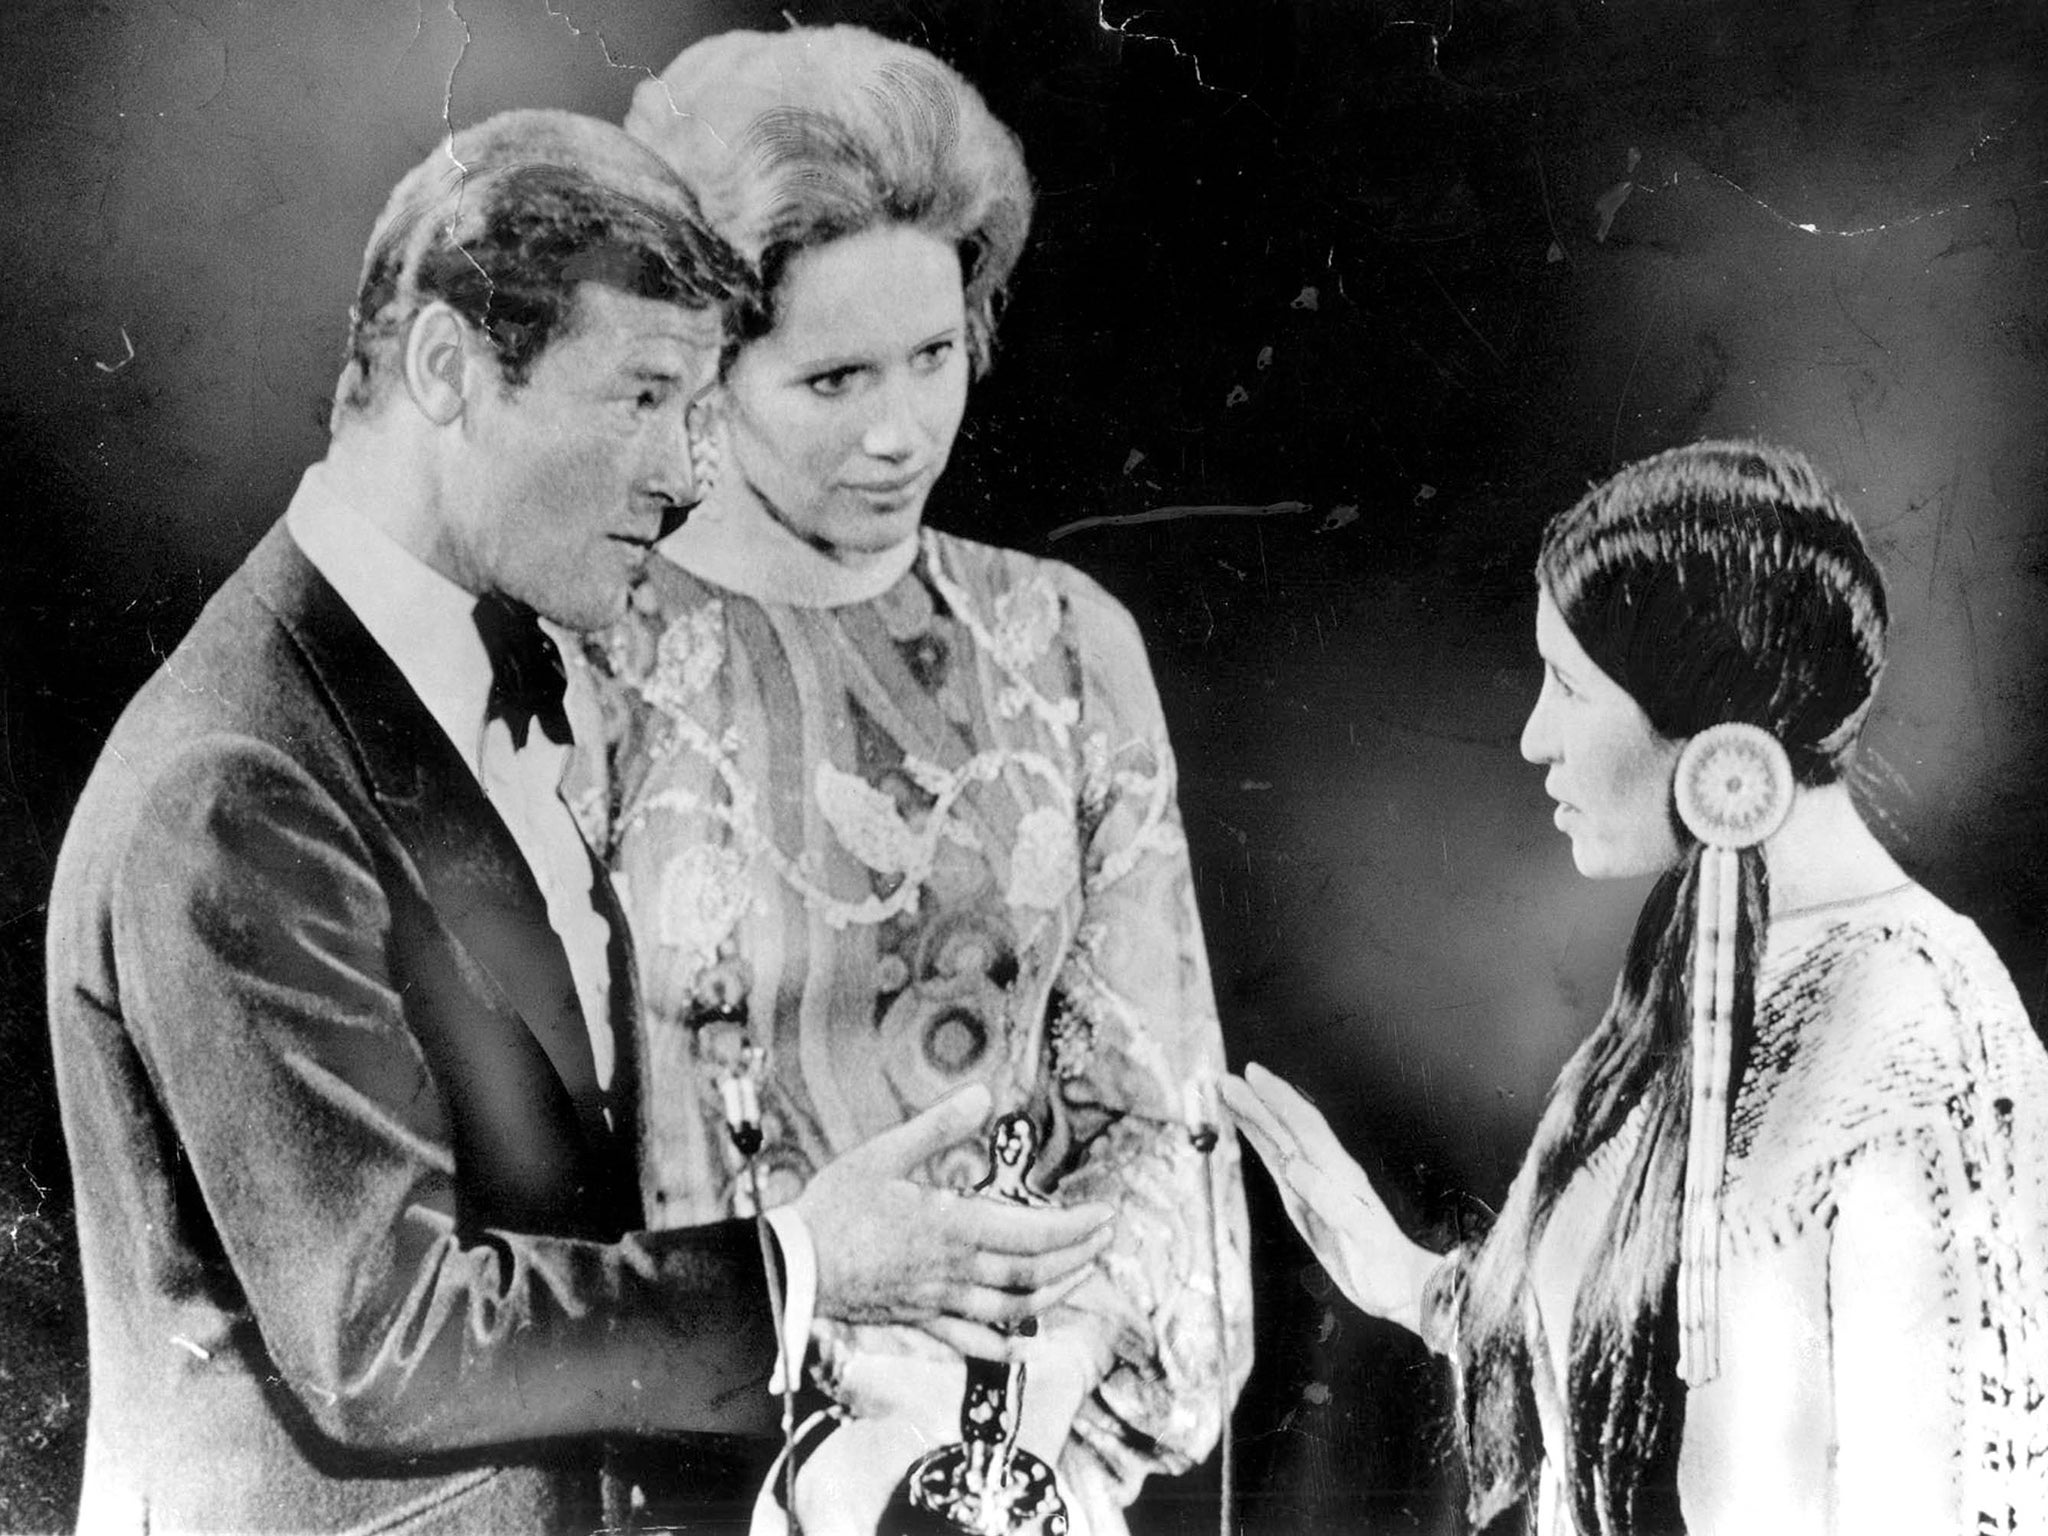 Roger Moore and Liv Ullmann look nonplussed as Sacheen Littlefeather declines the Best Actor Oscar on behalf of Marlon Brando in 1973